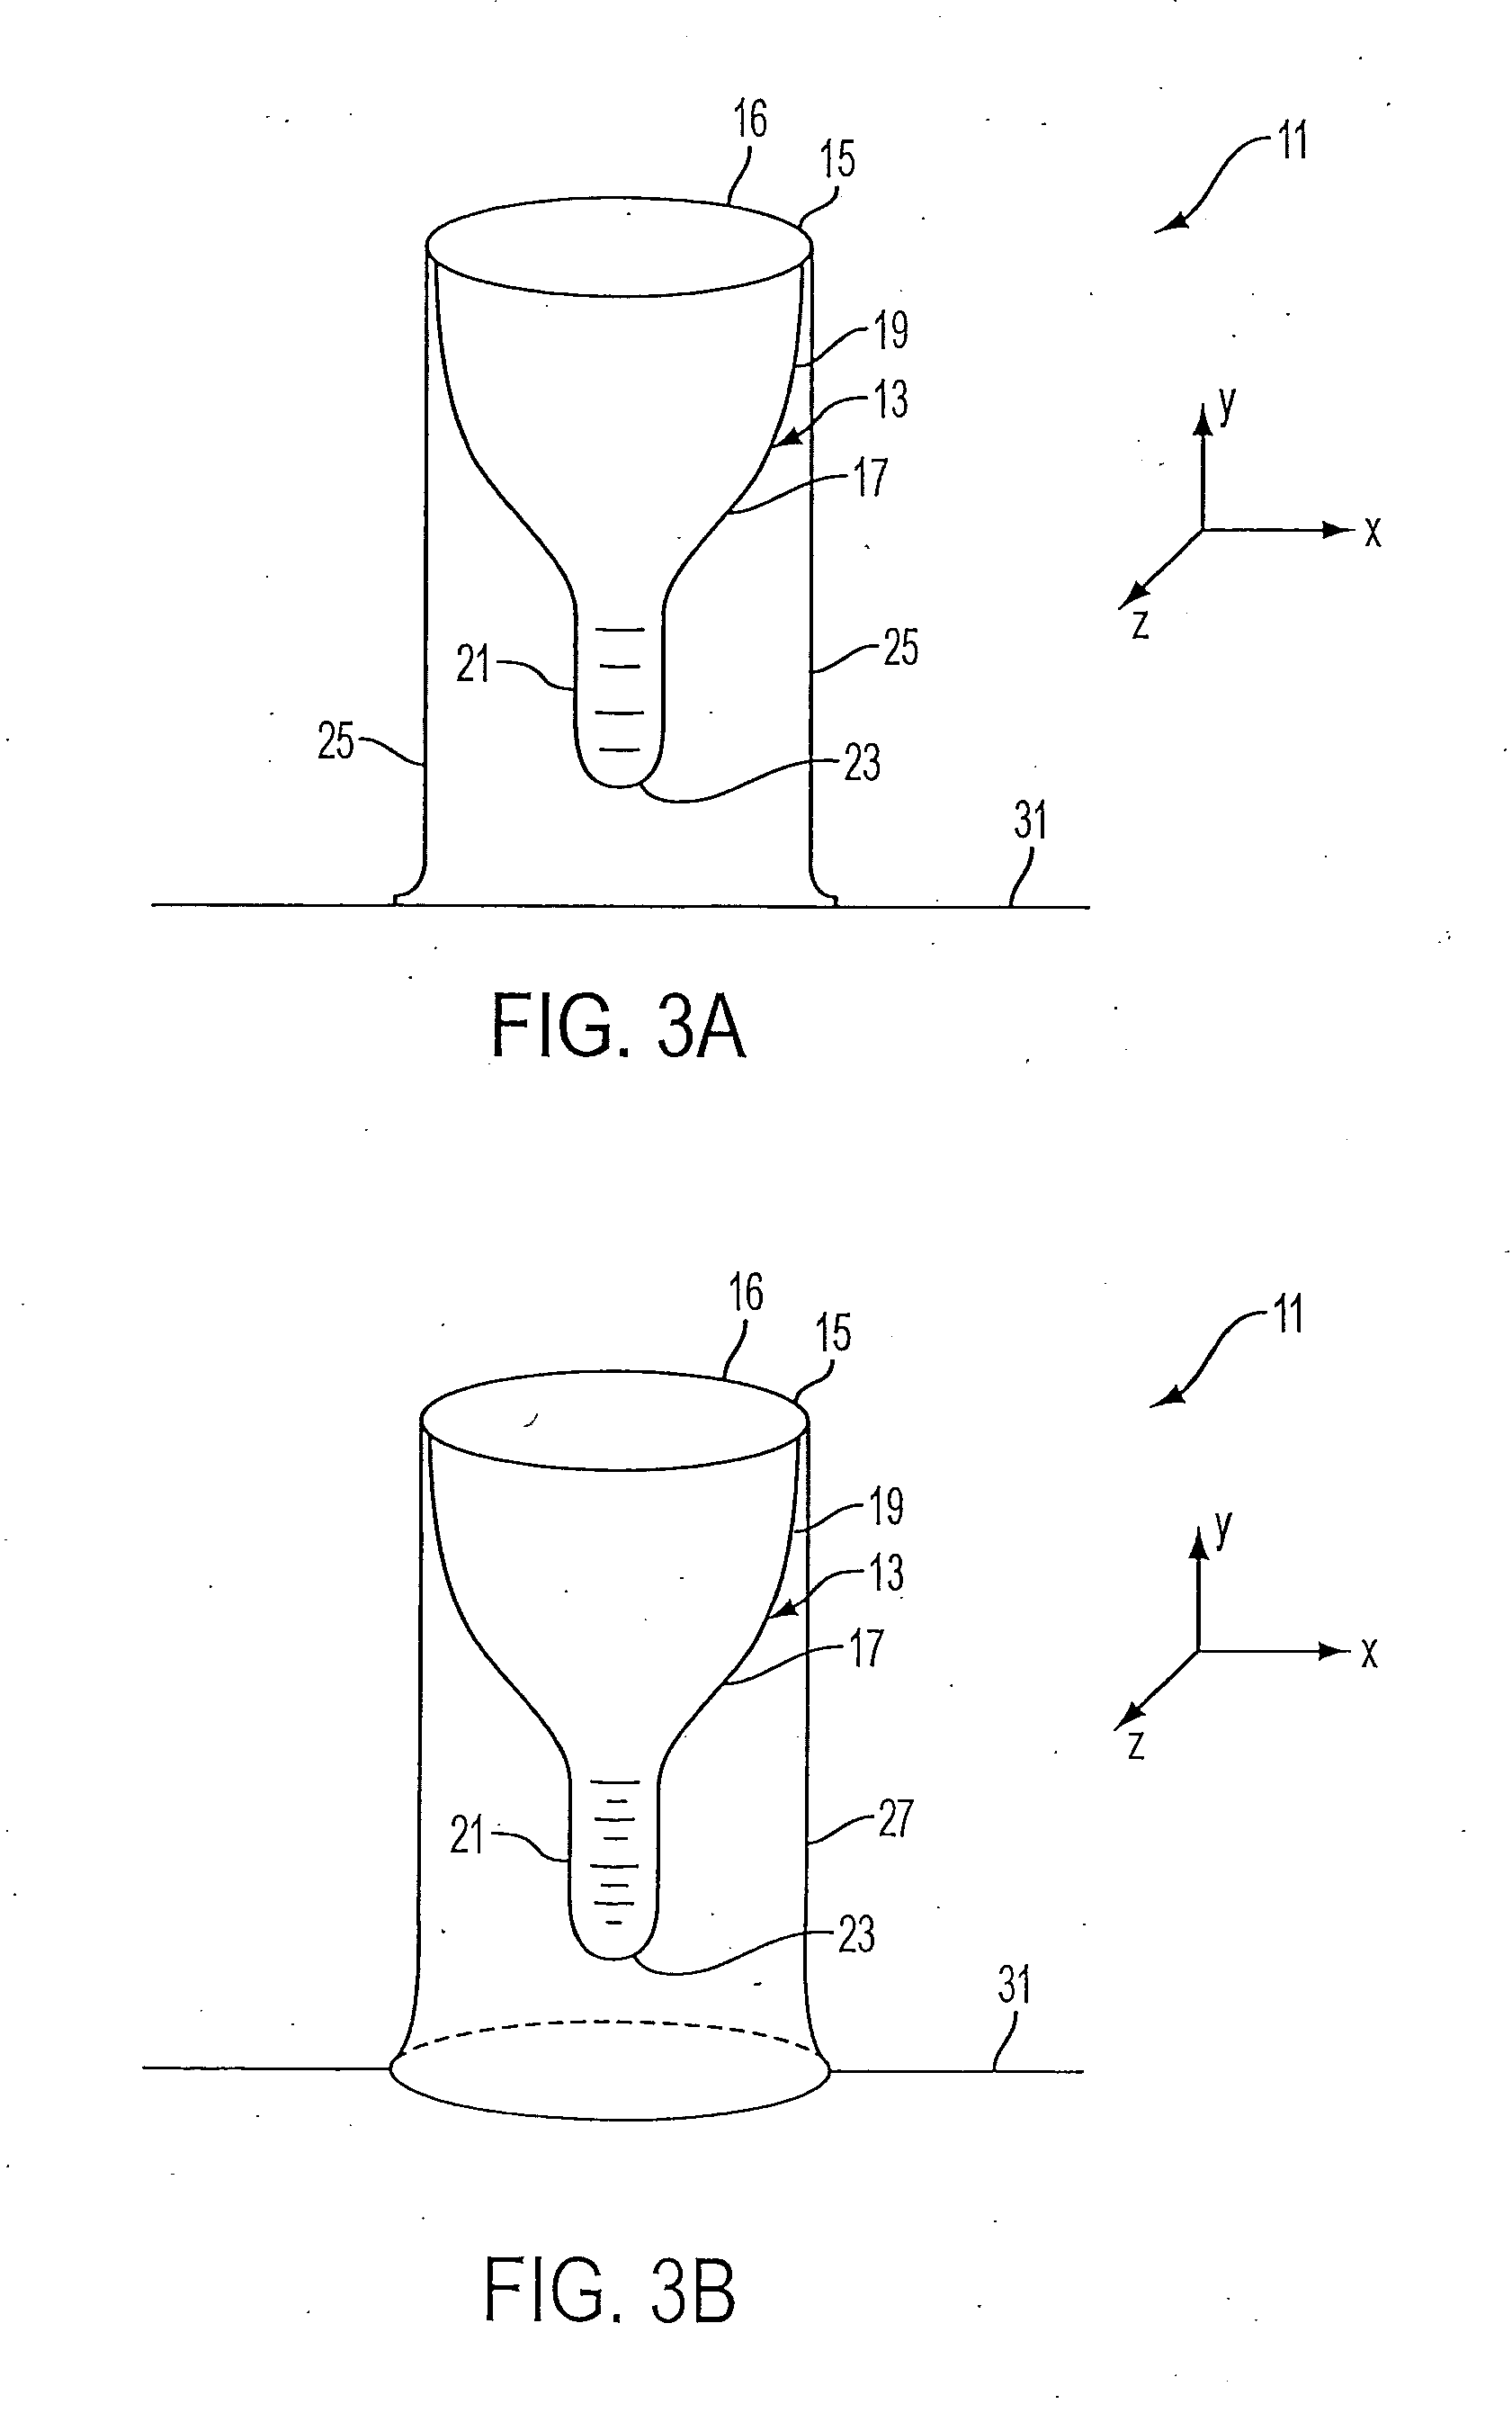 Glans compatible single unit semen collection and storage device, kit and related methods of use